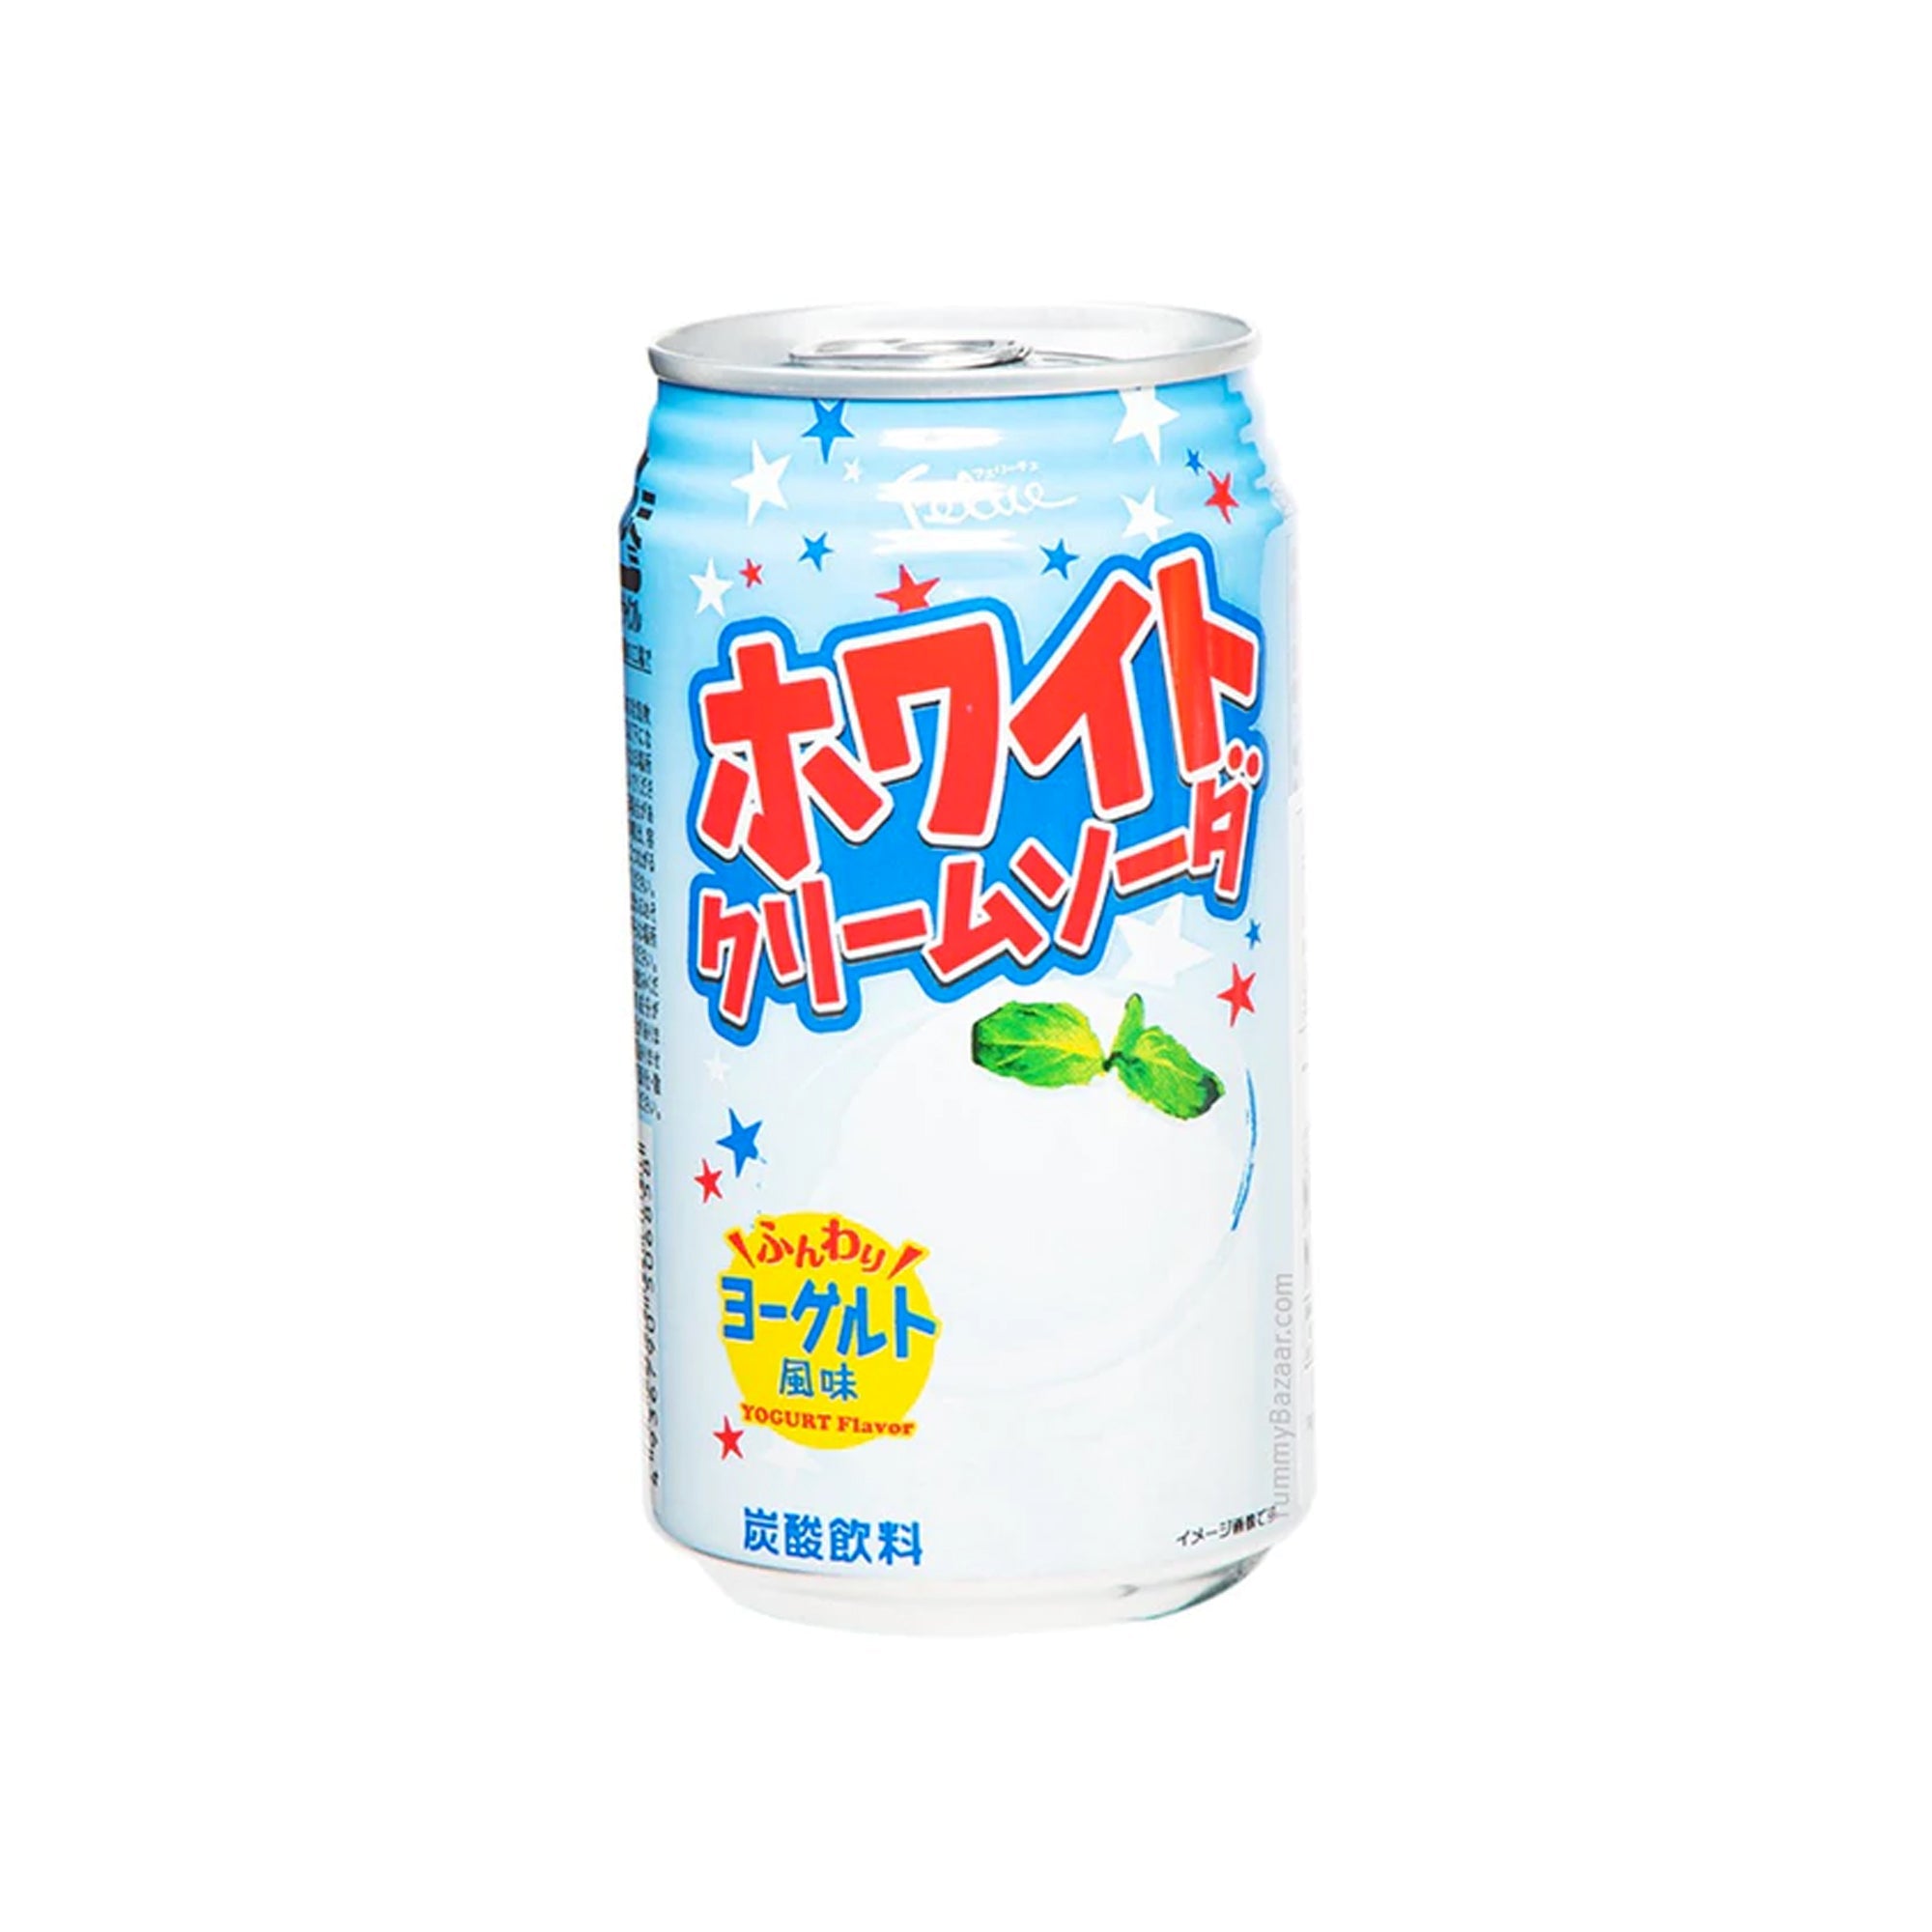 Plastic Bottles of Japanese Energy Soda Drinks Illustrated with Anime and  Manga Characters. Editorial Image - Image of anime, japanese: 240487405